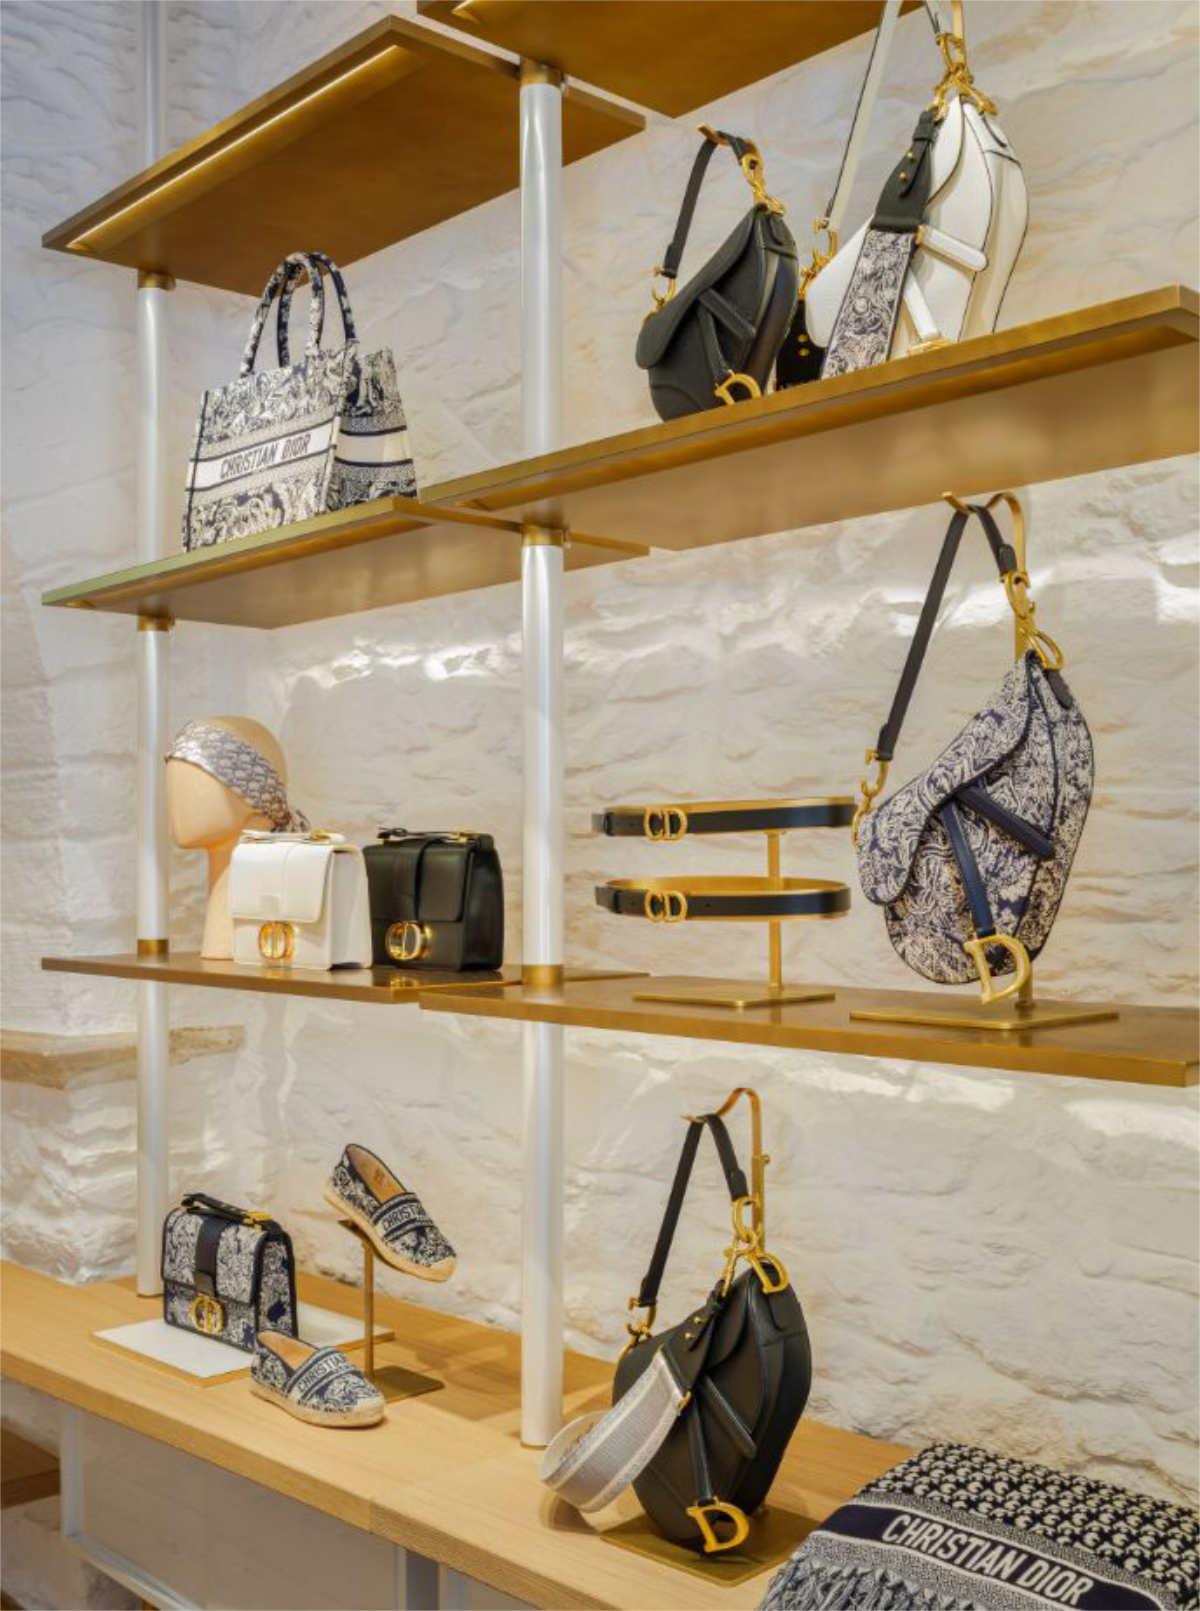 Discover the Dior Boutique in Mykonos